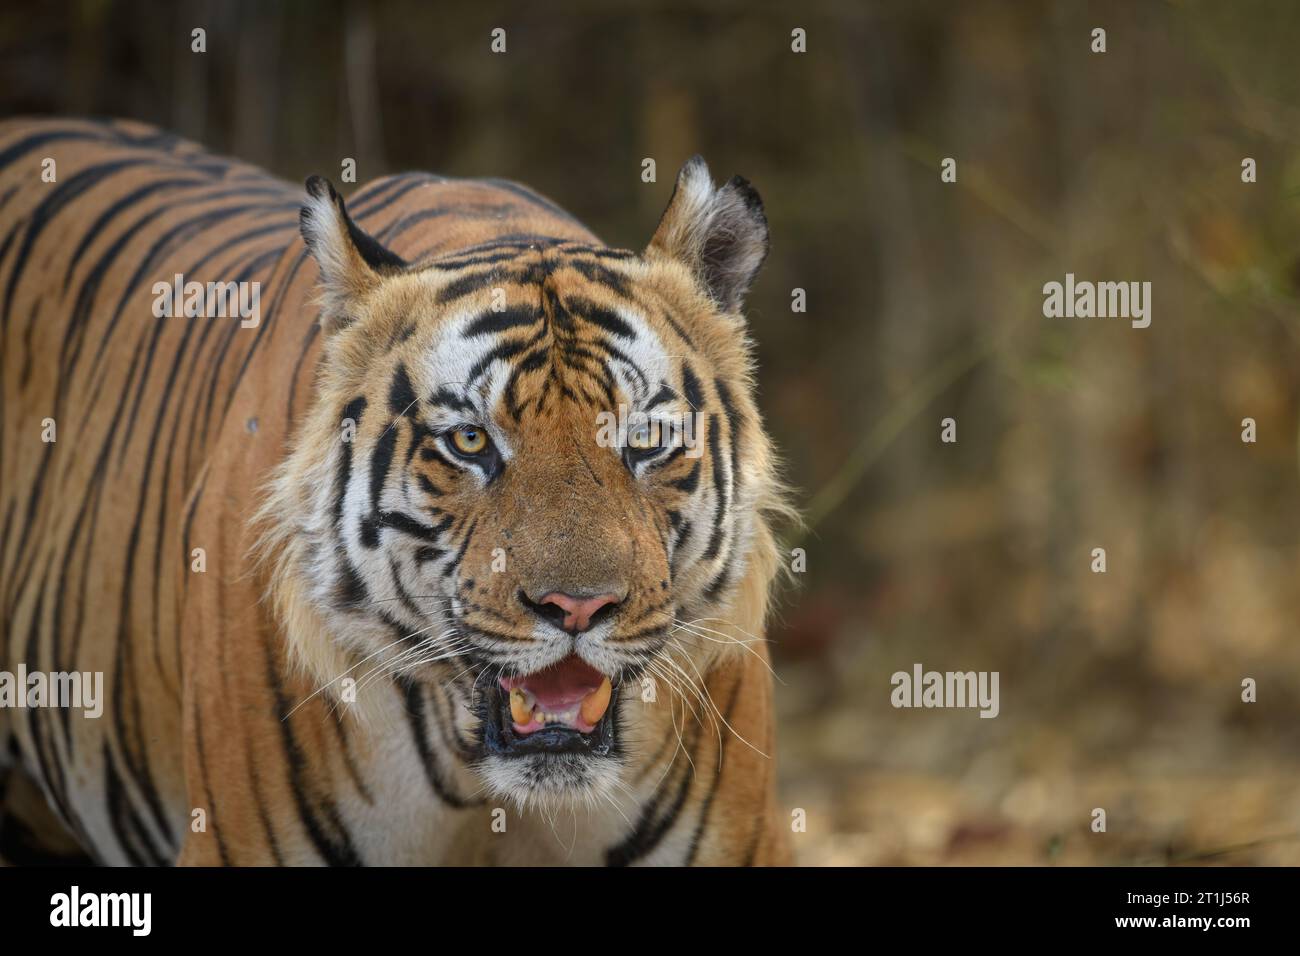 frontal portrait of a mature male tiger against dry bamboo forest background Stock Photo